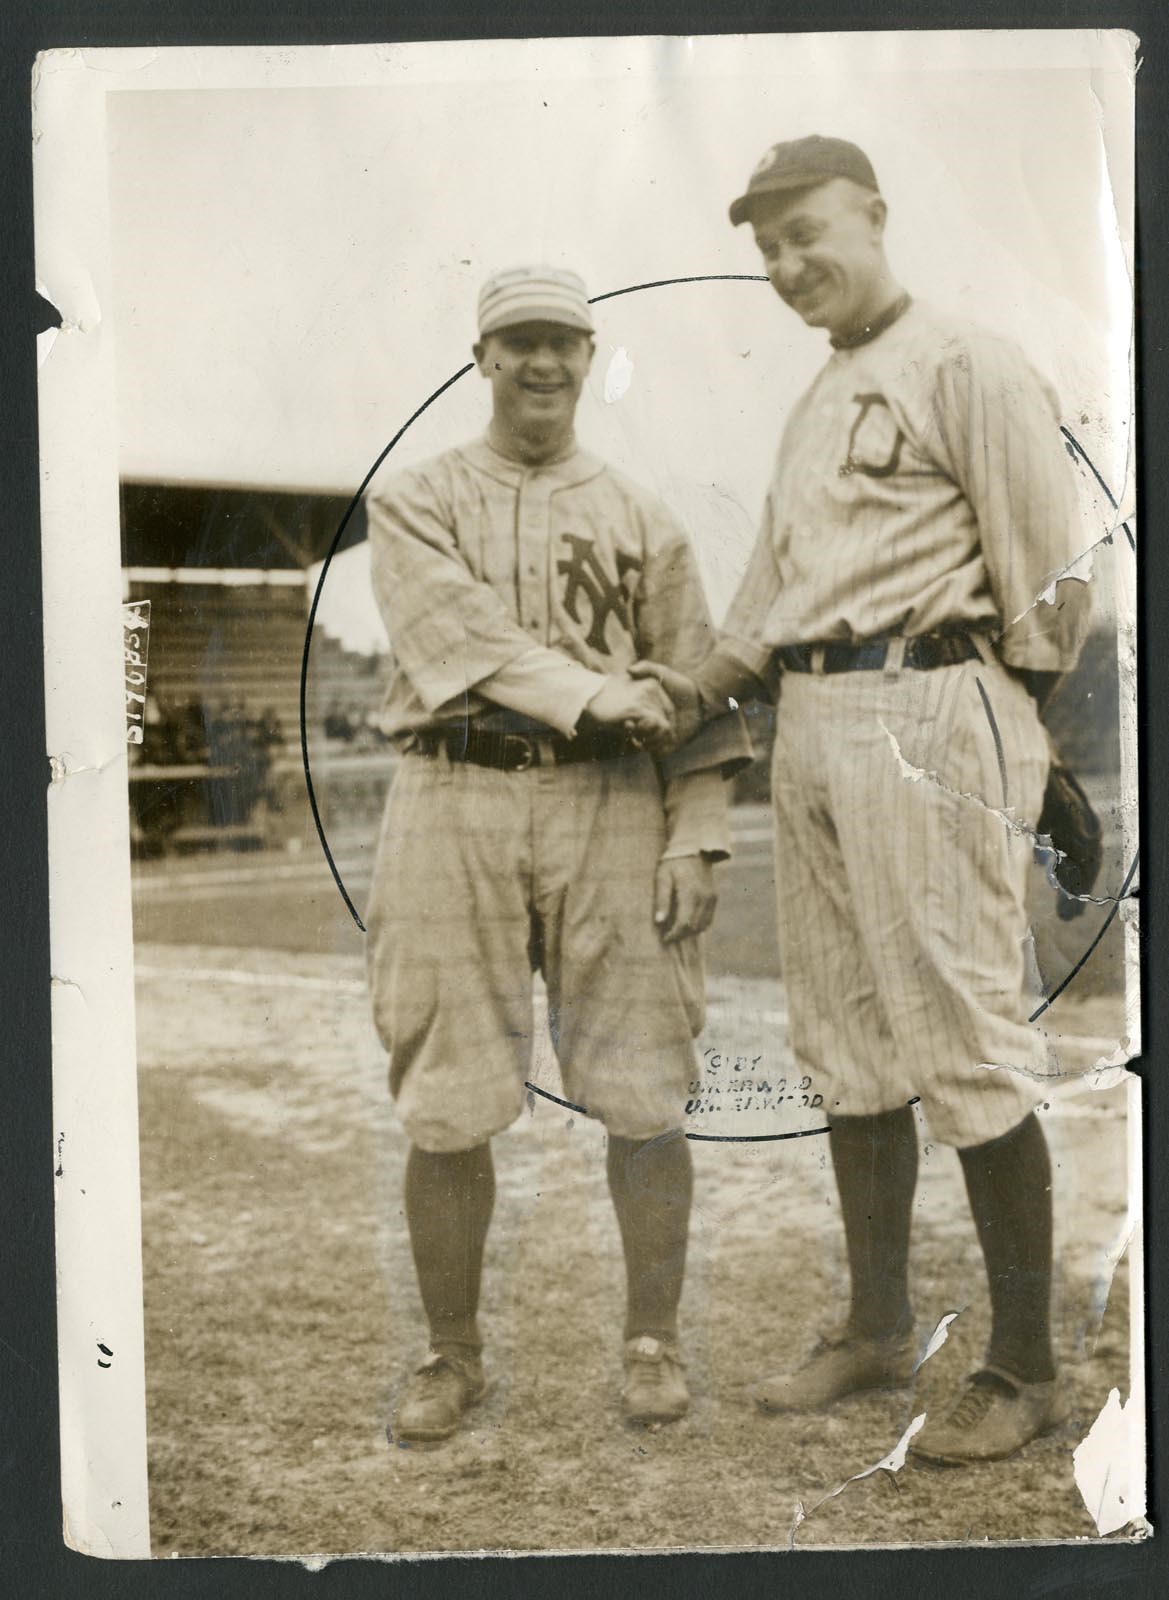 - 1916 "Ty Cobb" of the Federal League and Ty Cobb of the Majors